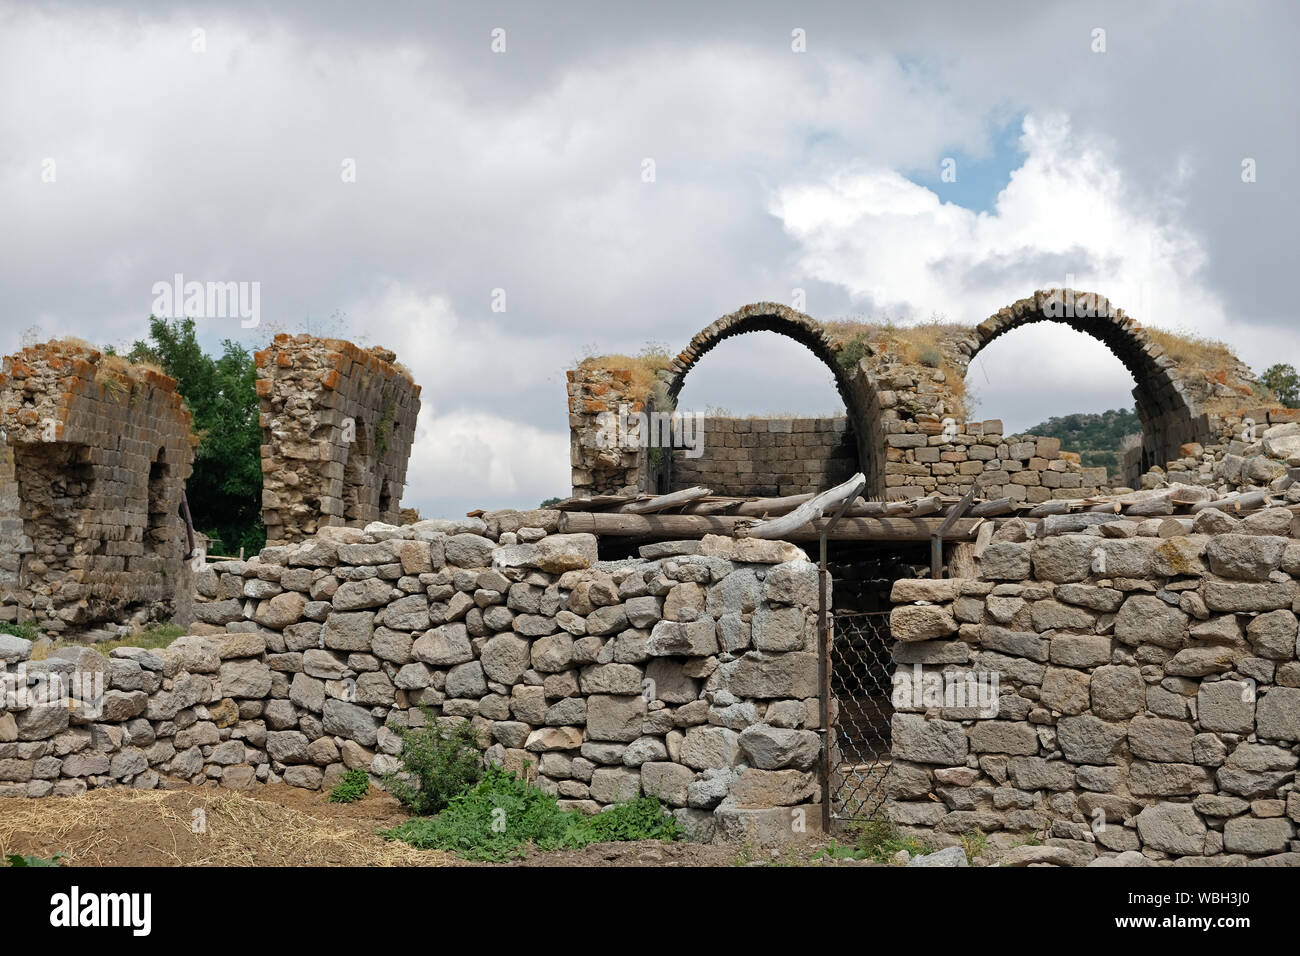 The ruins of some Byzantine buildings can be seen in Degle Orenyeri, a volcanic mountain in the north of Karaman. Stock Photo